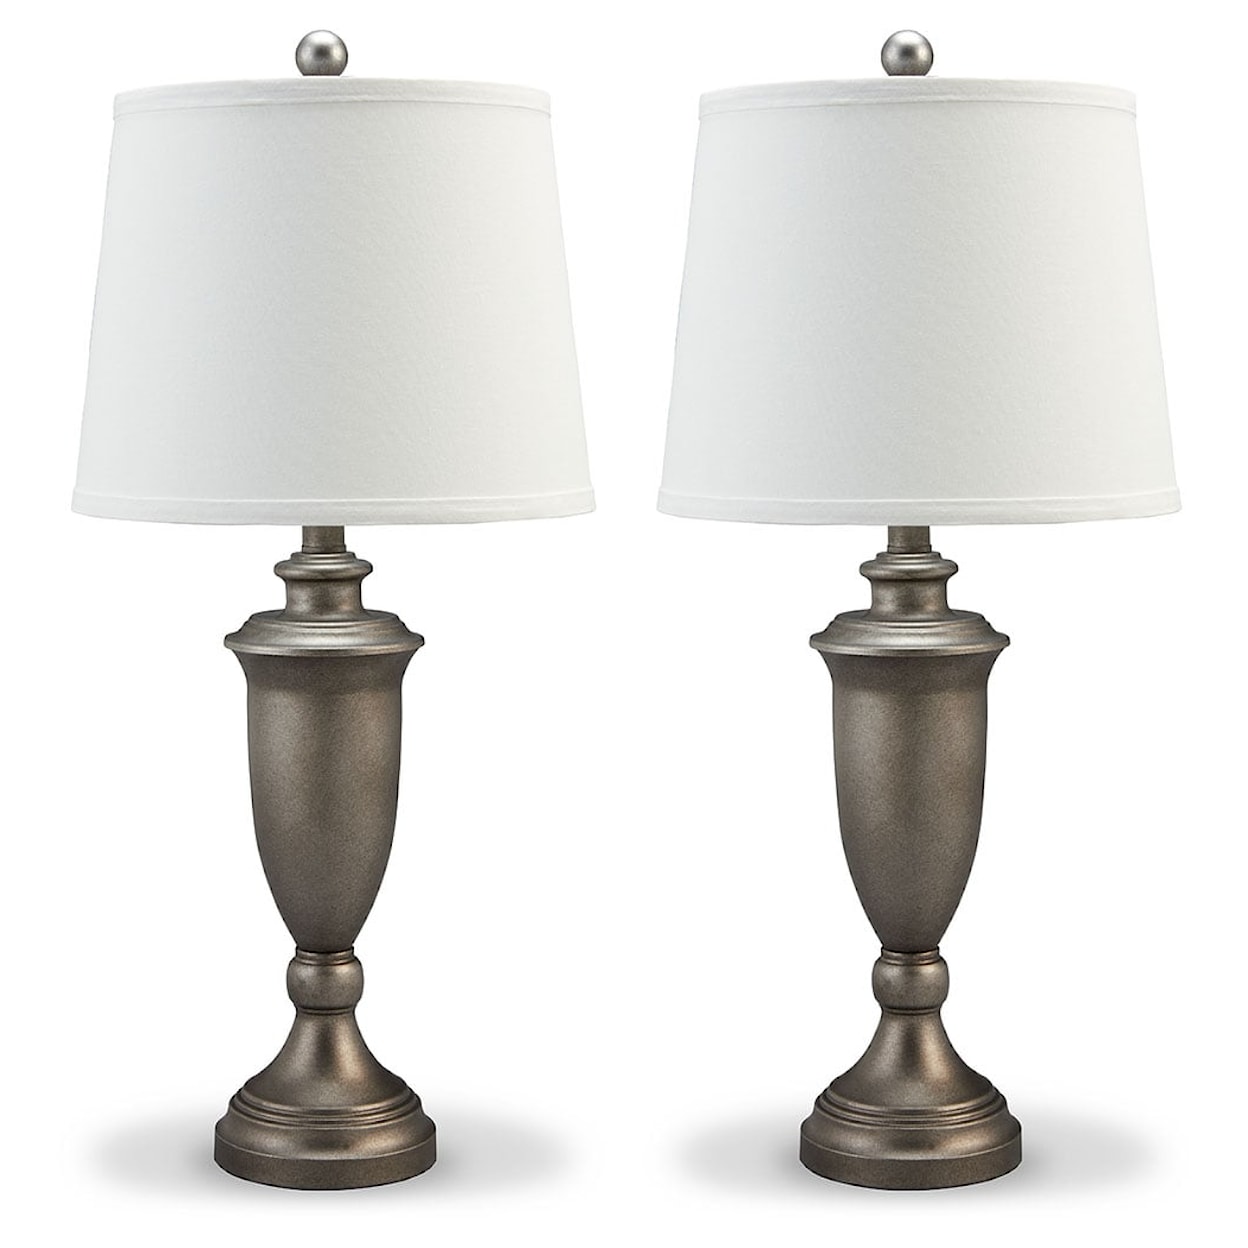 Signature Design by Ashley Lamps - Traditional Classics Doraley Table Lamp (Set of 2)